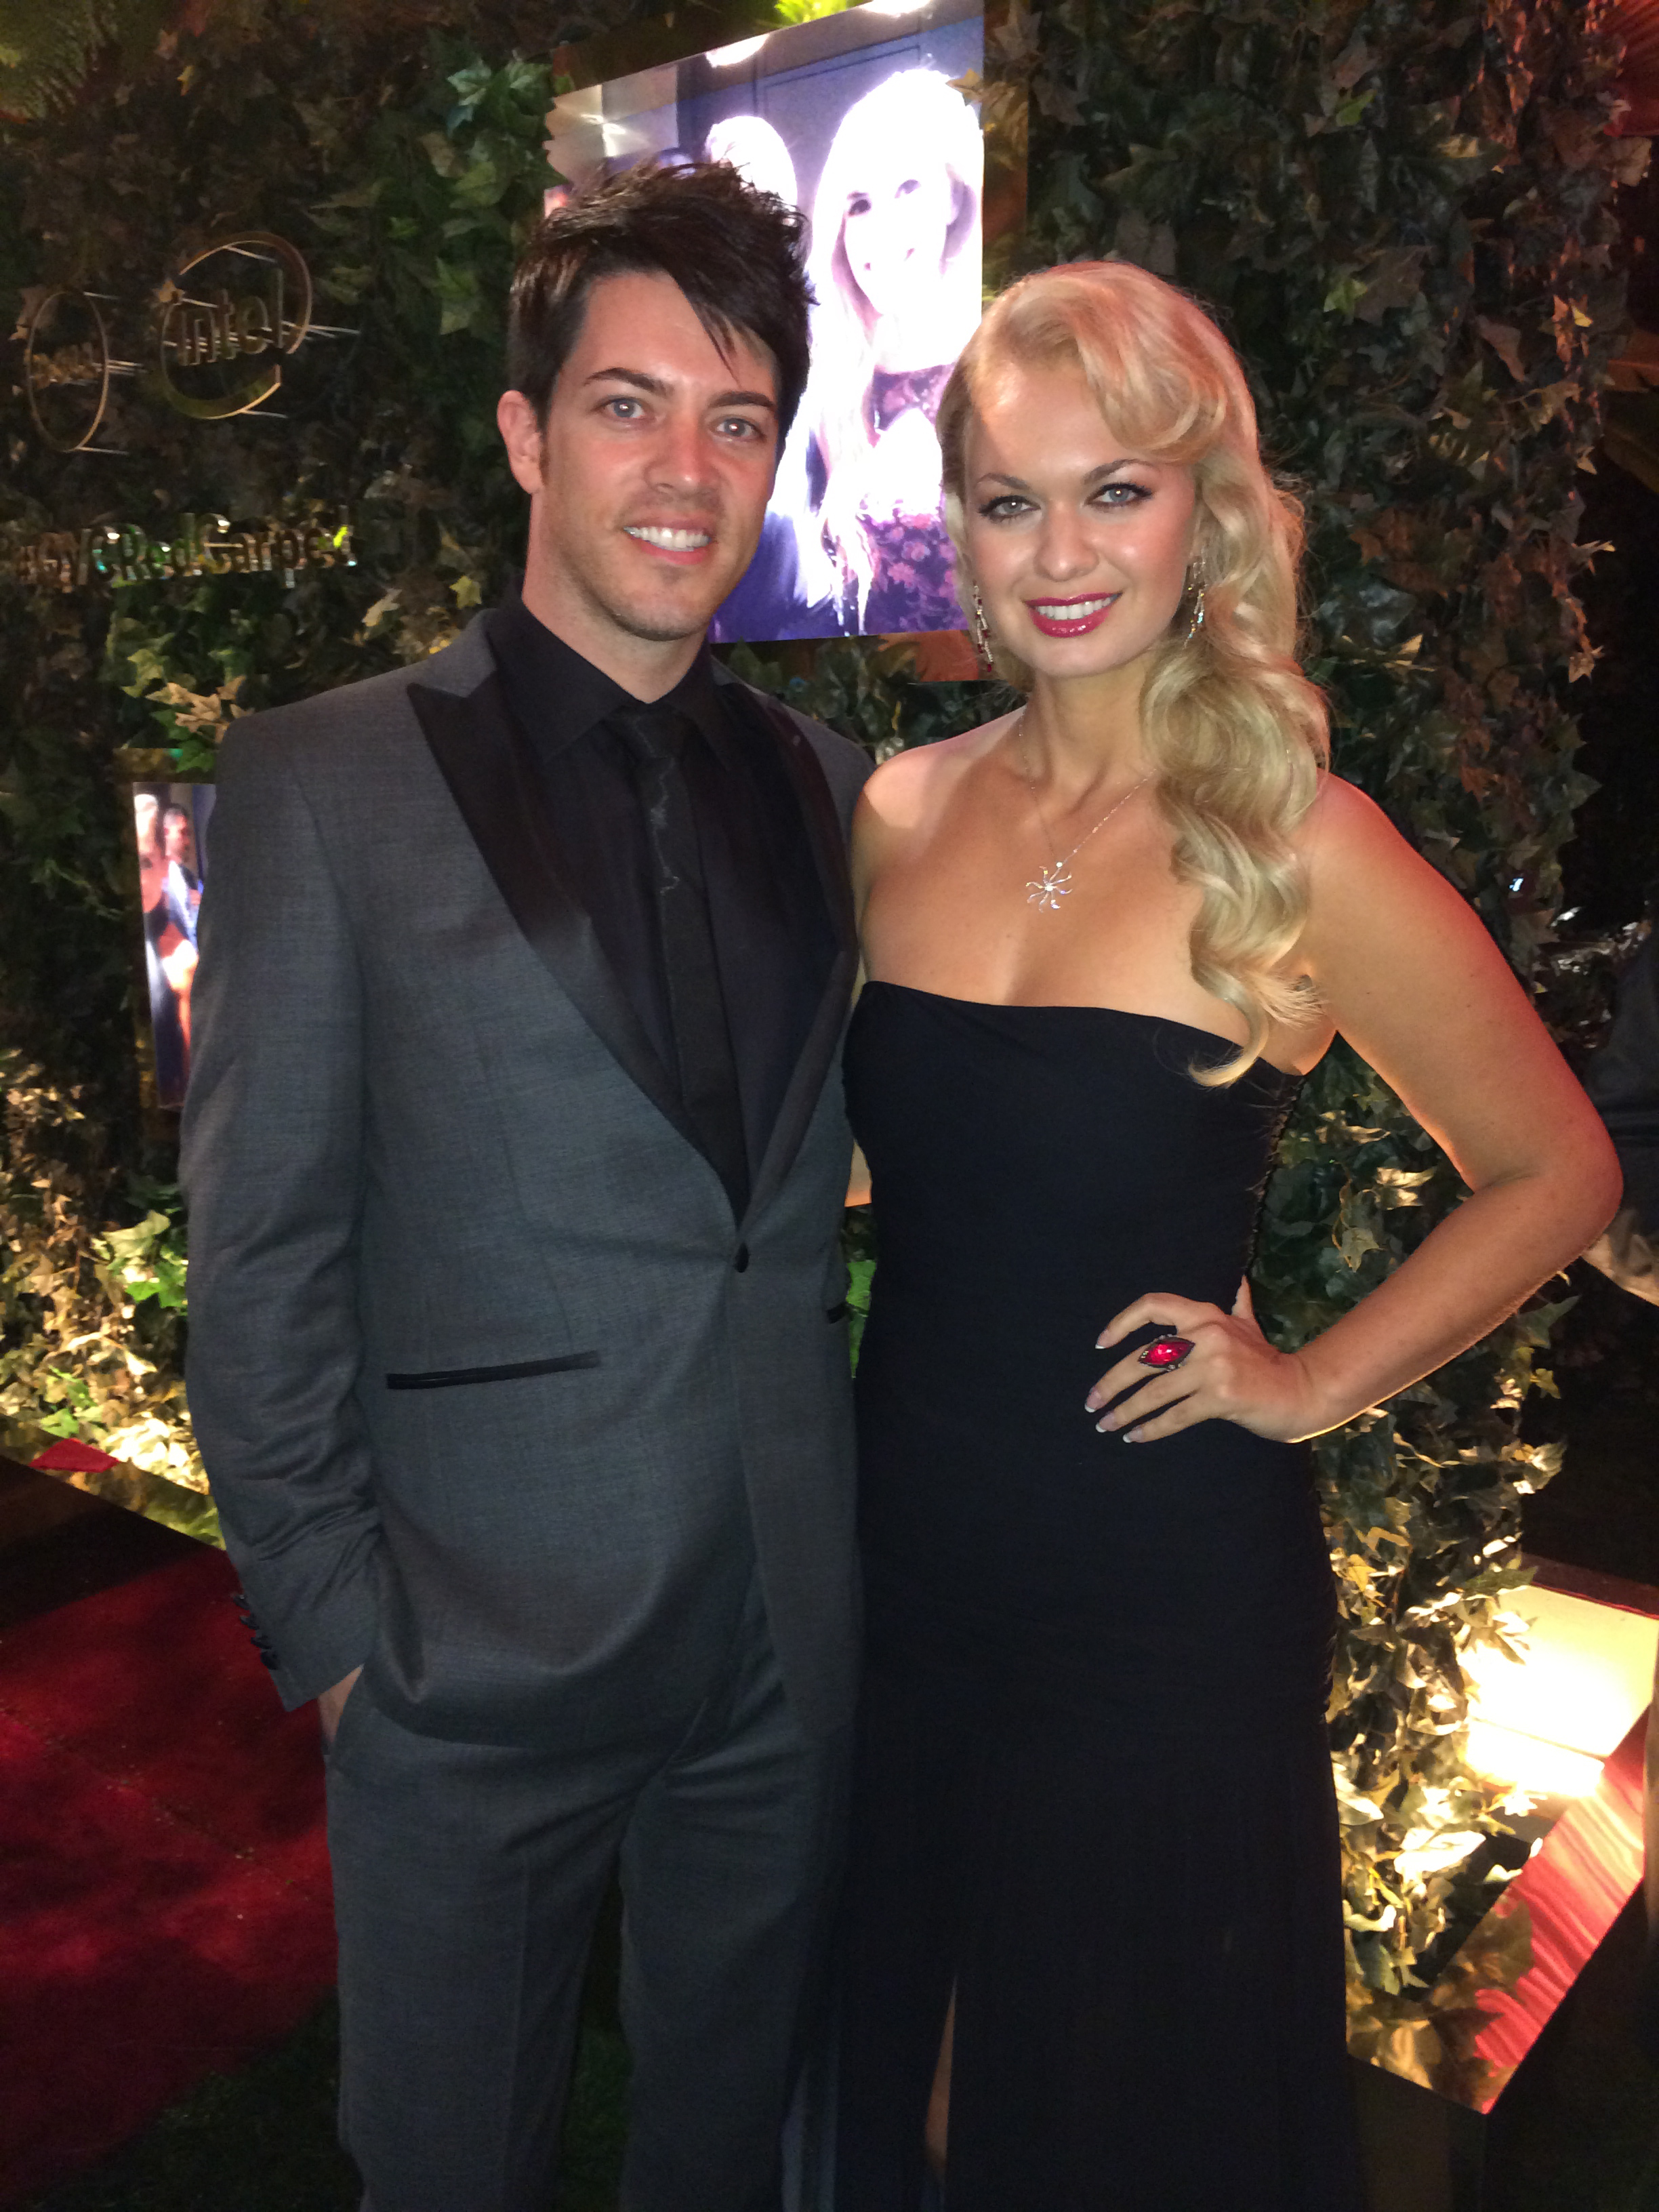 JD Scott and Angeline-Rose Troy at the QVC Red Carpet Style event pre-2014 Oscars.